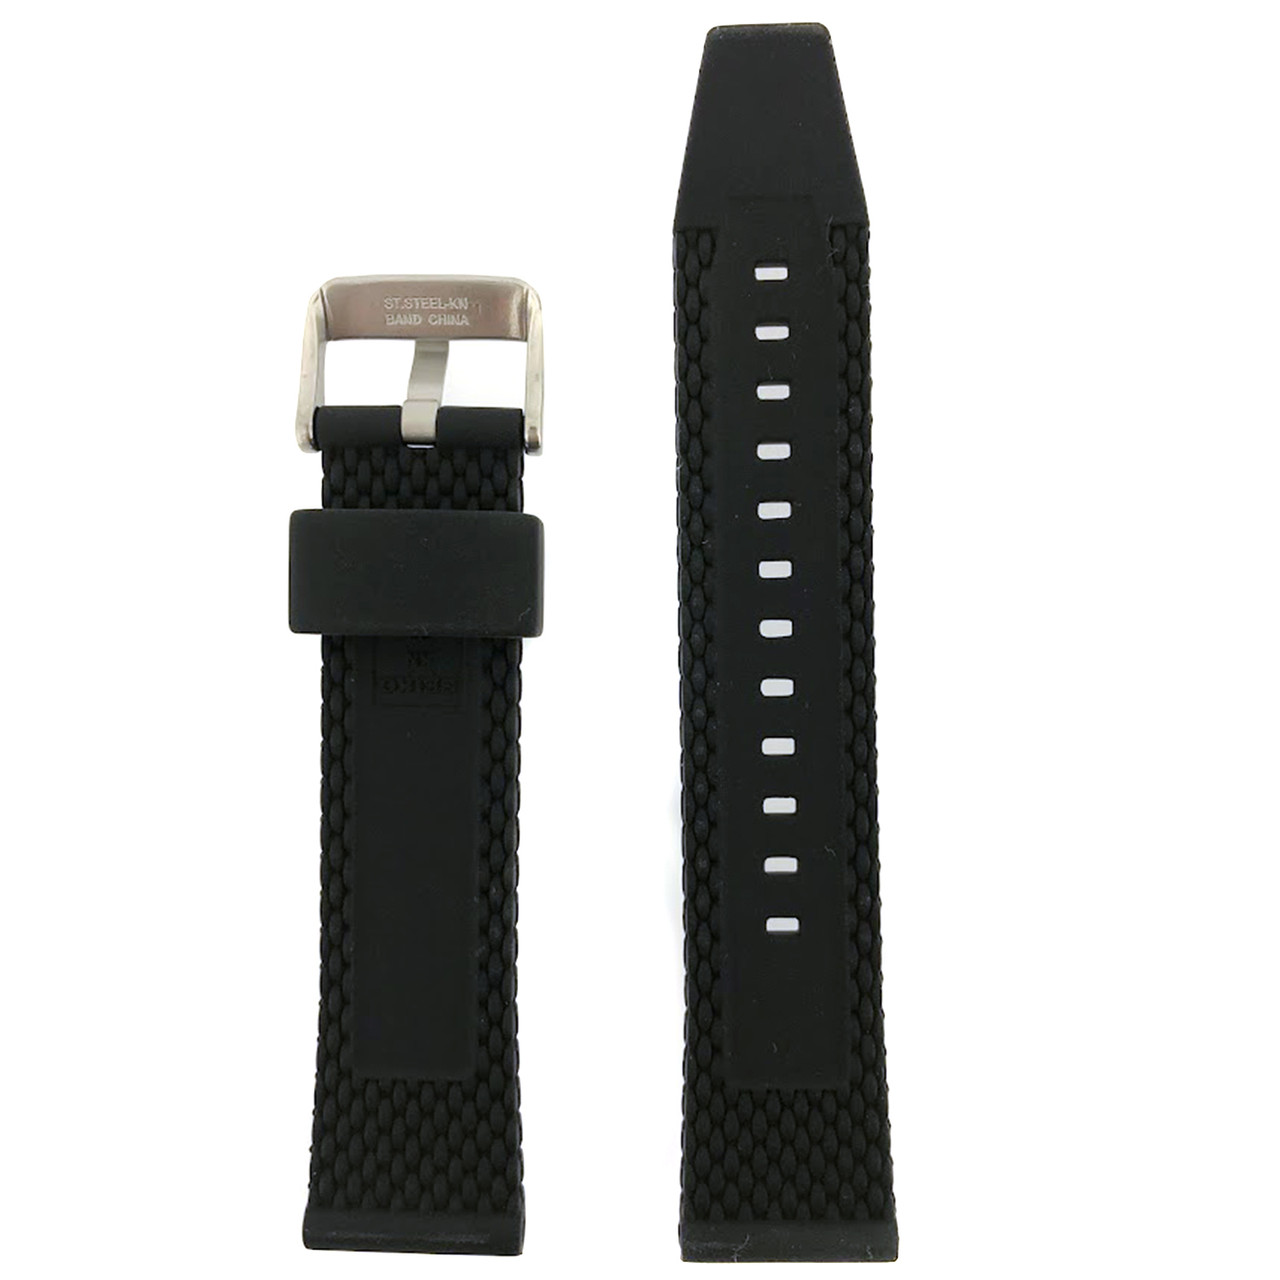 Seiko SRPD33 watch band R045011J9 Watch Band WatchMaterial